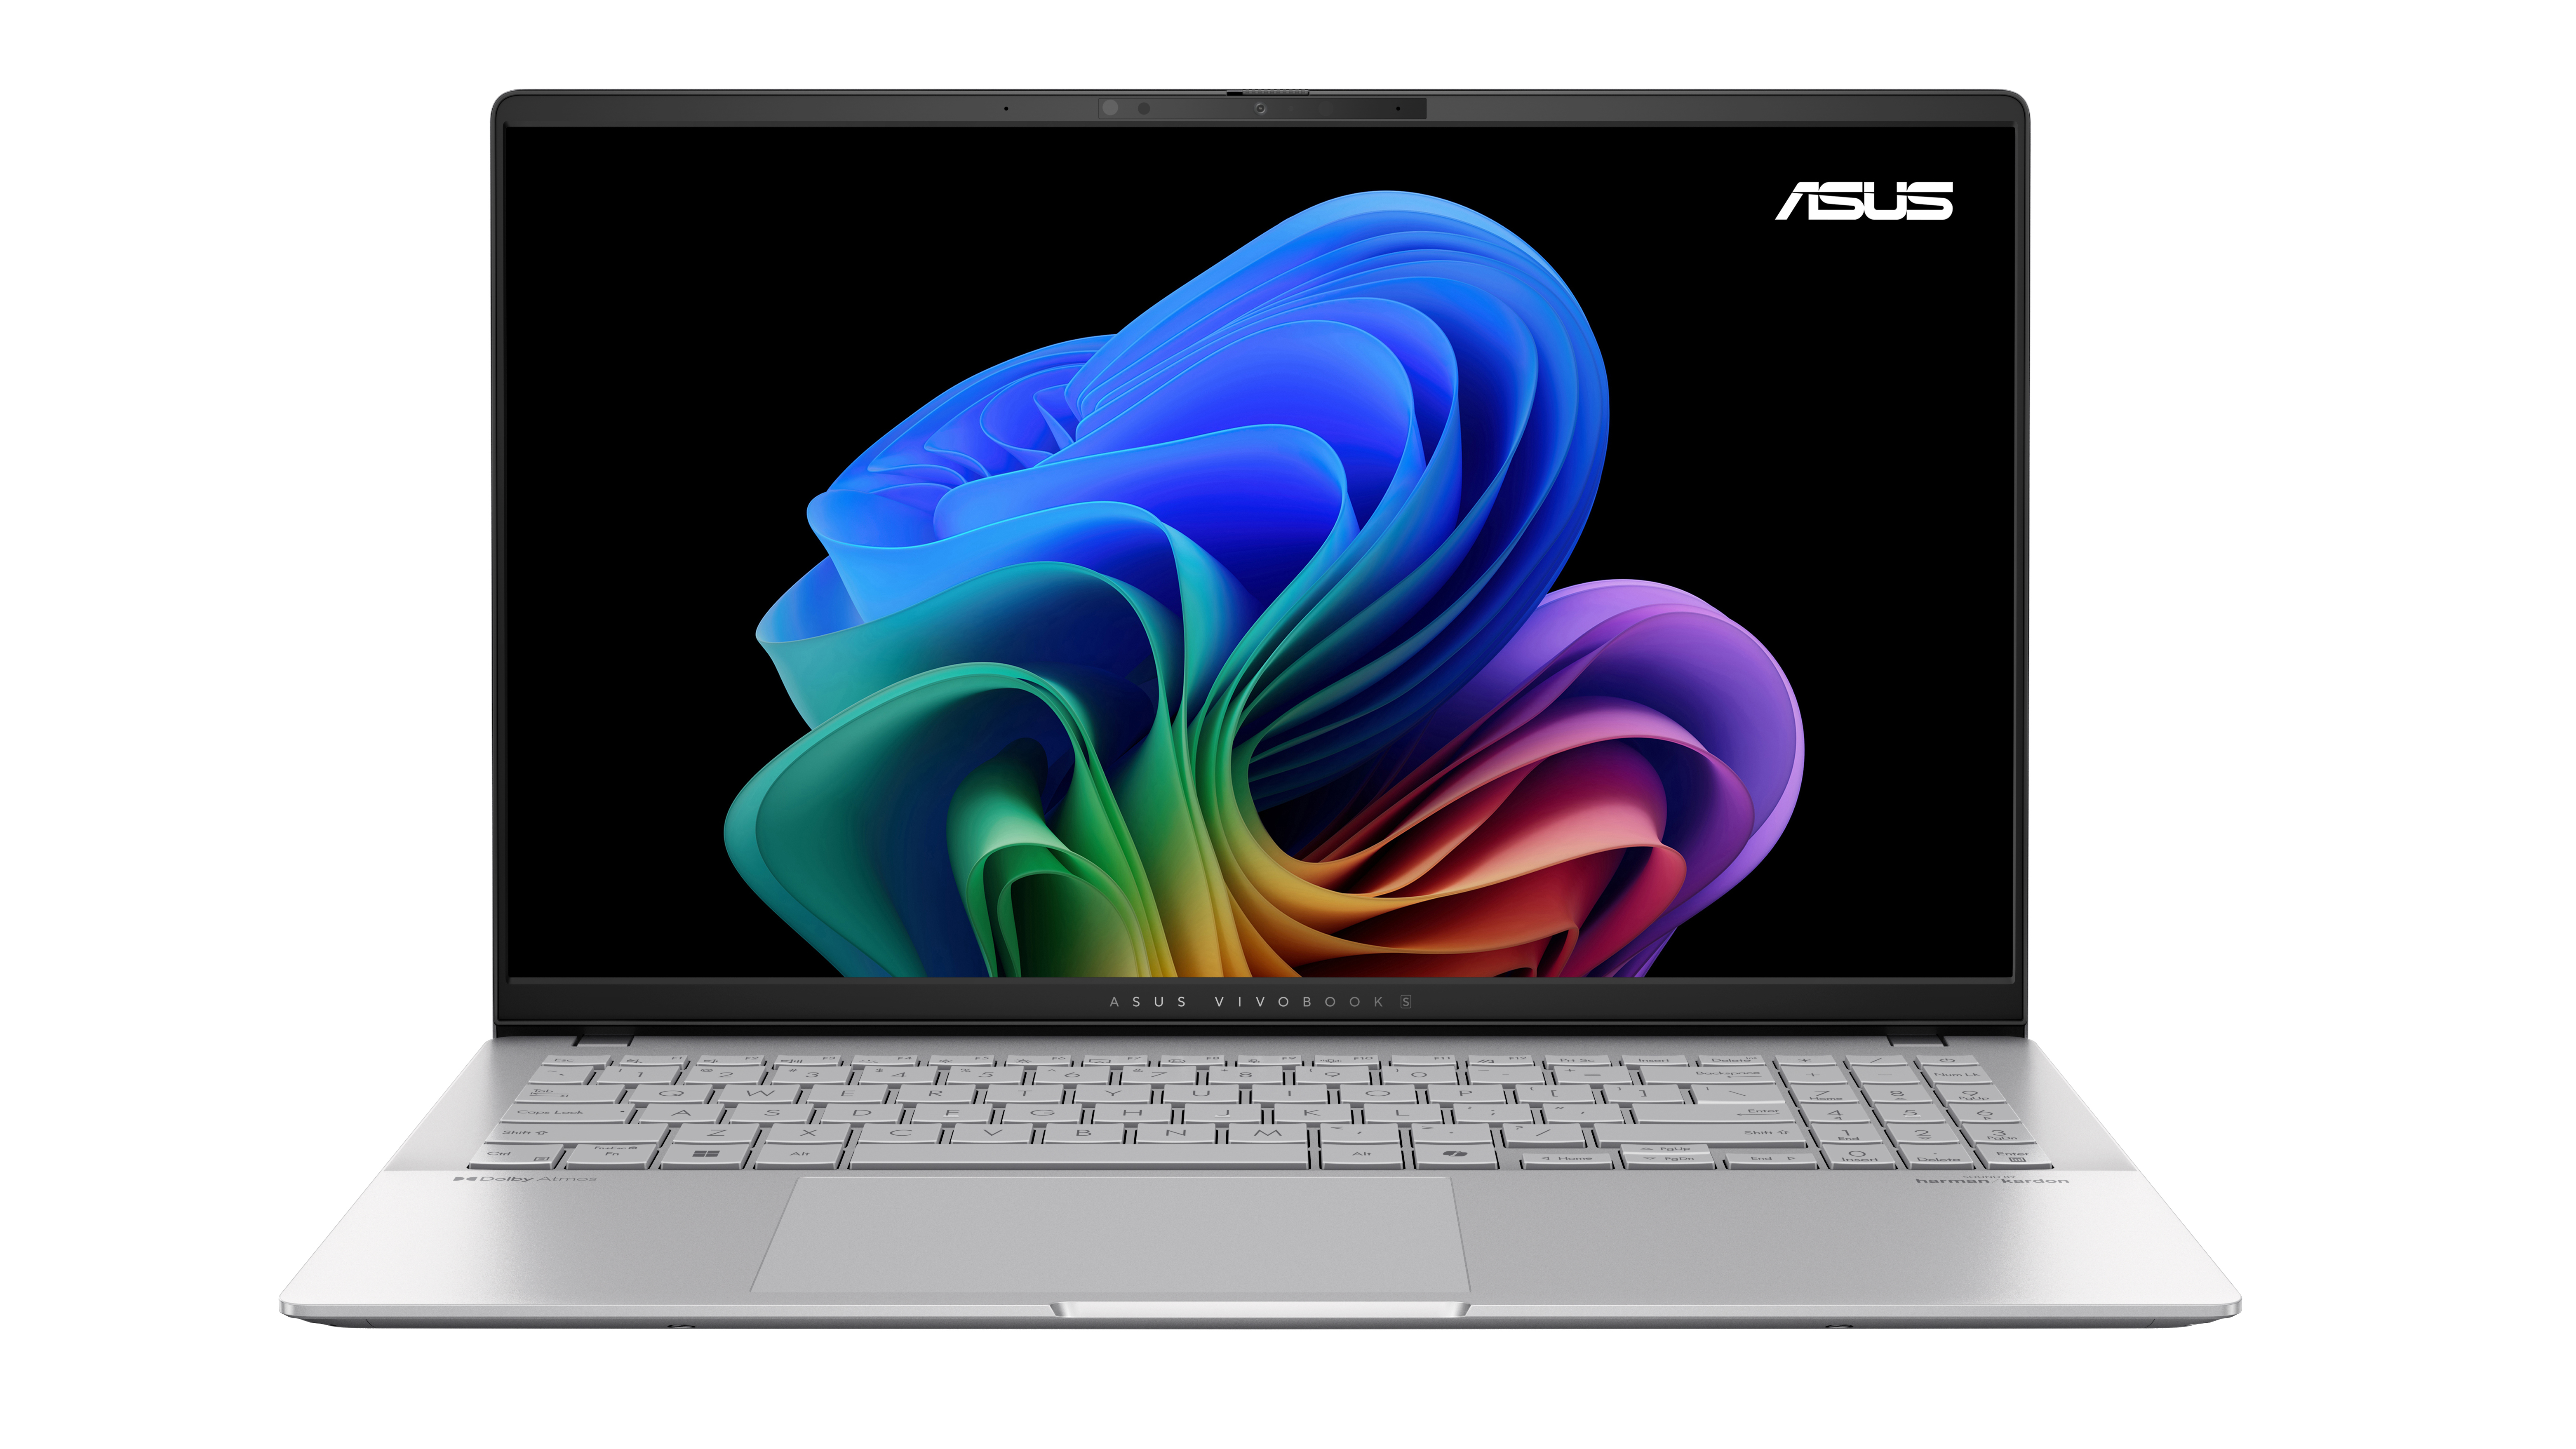 Straight-on marketing image of the Asus Vivobook S 15 laptop against a white background.